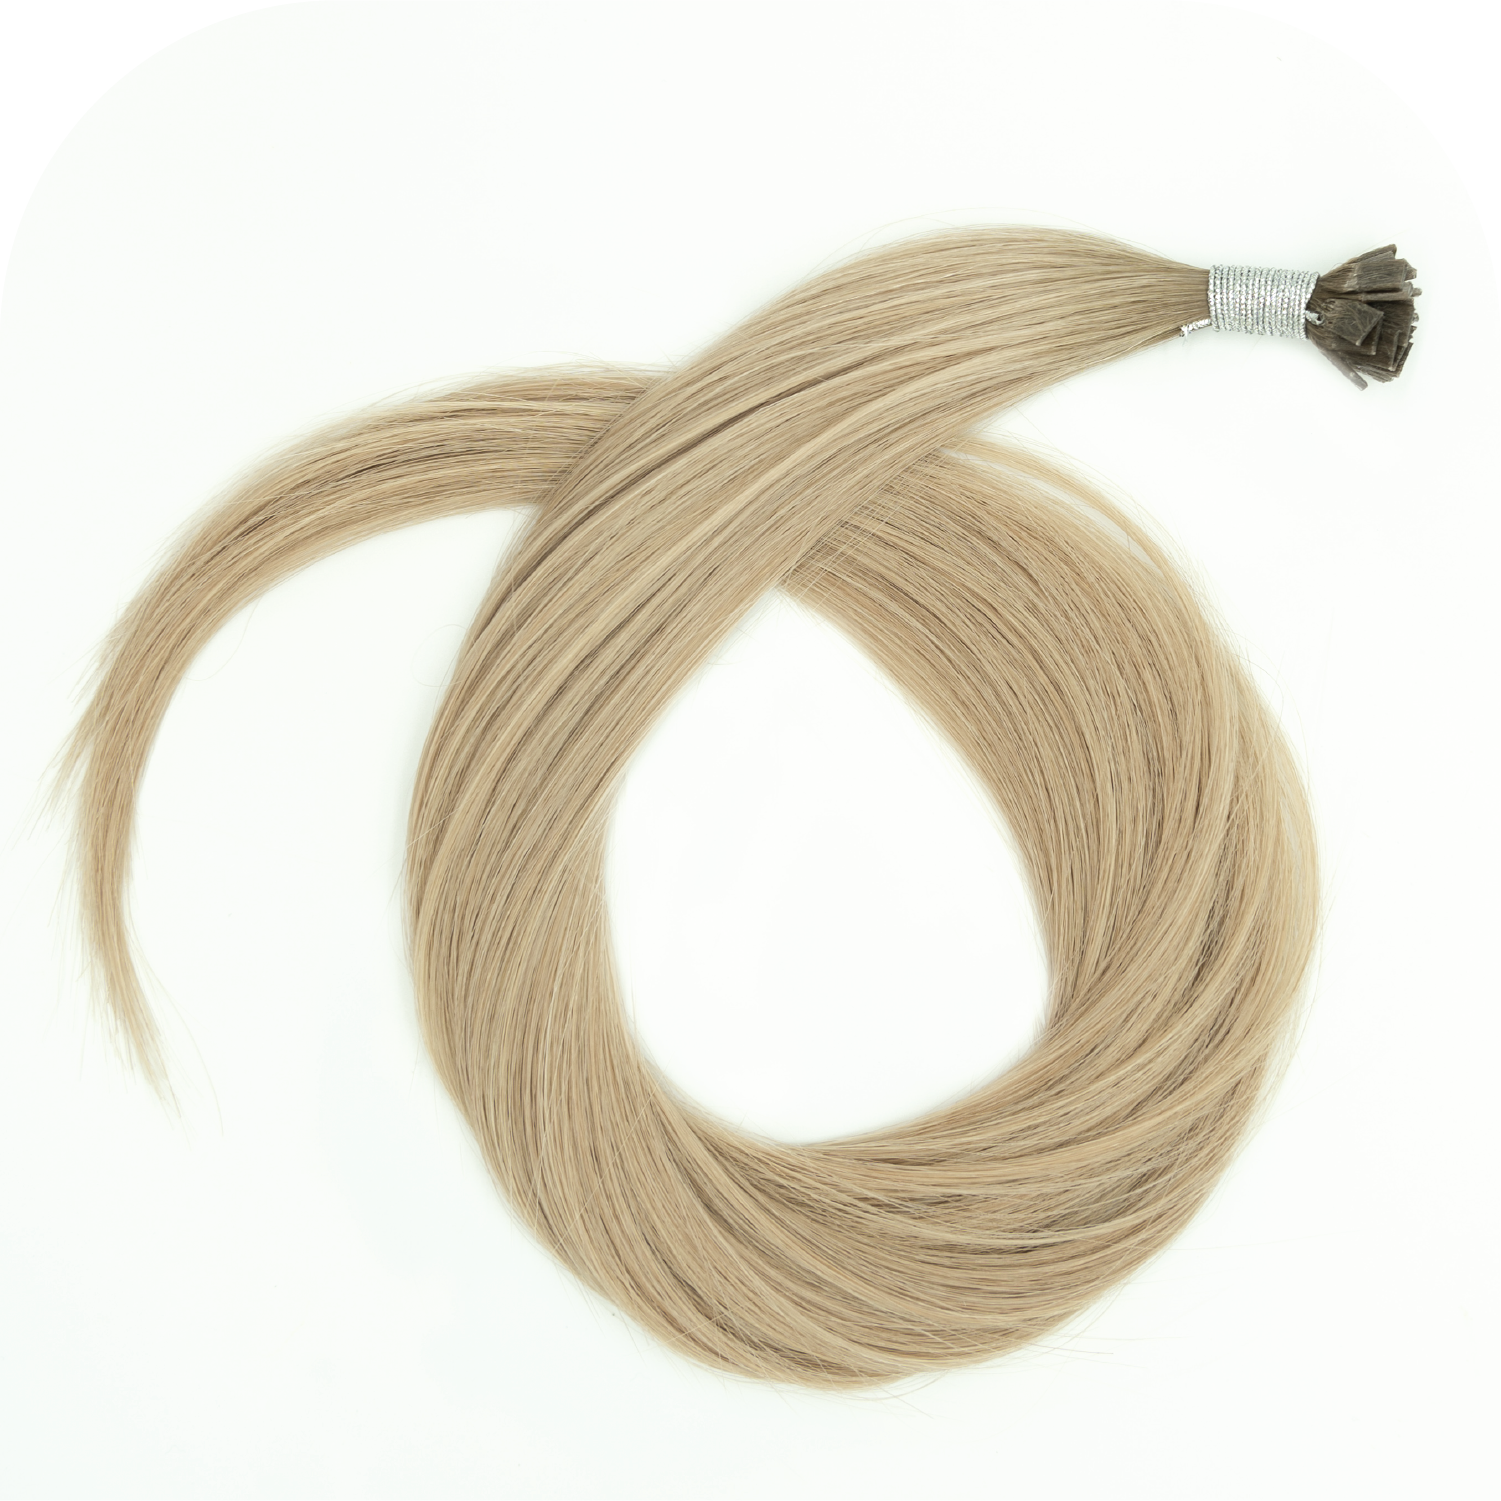 Couture Hair Co. Couture Tip or K Tip Hair Extension in Color Toasted Almond #8/18/60